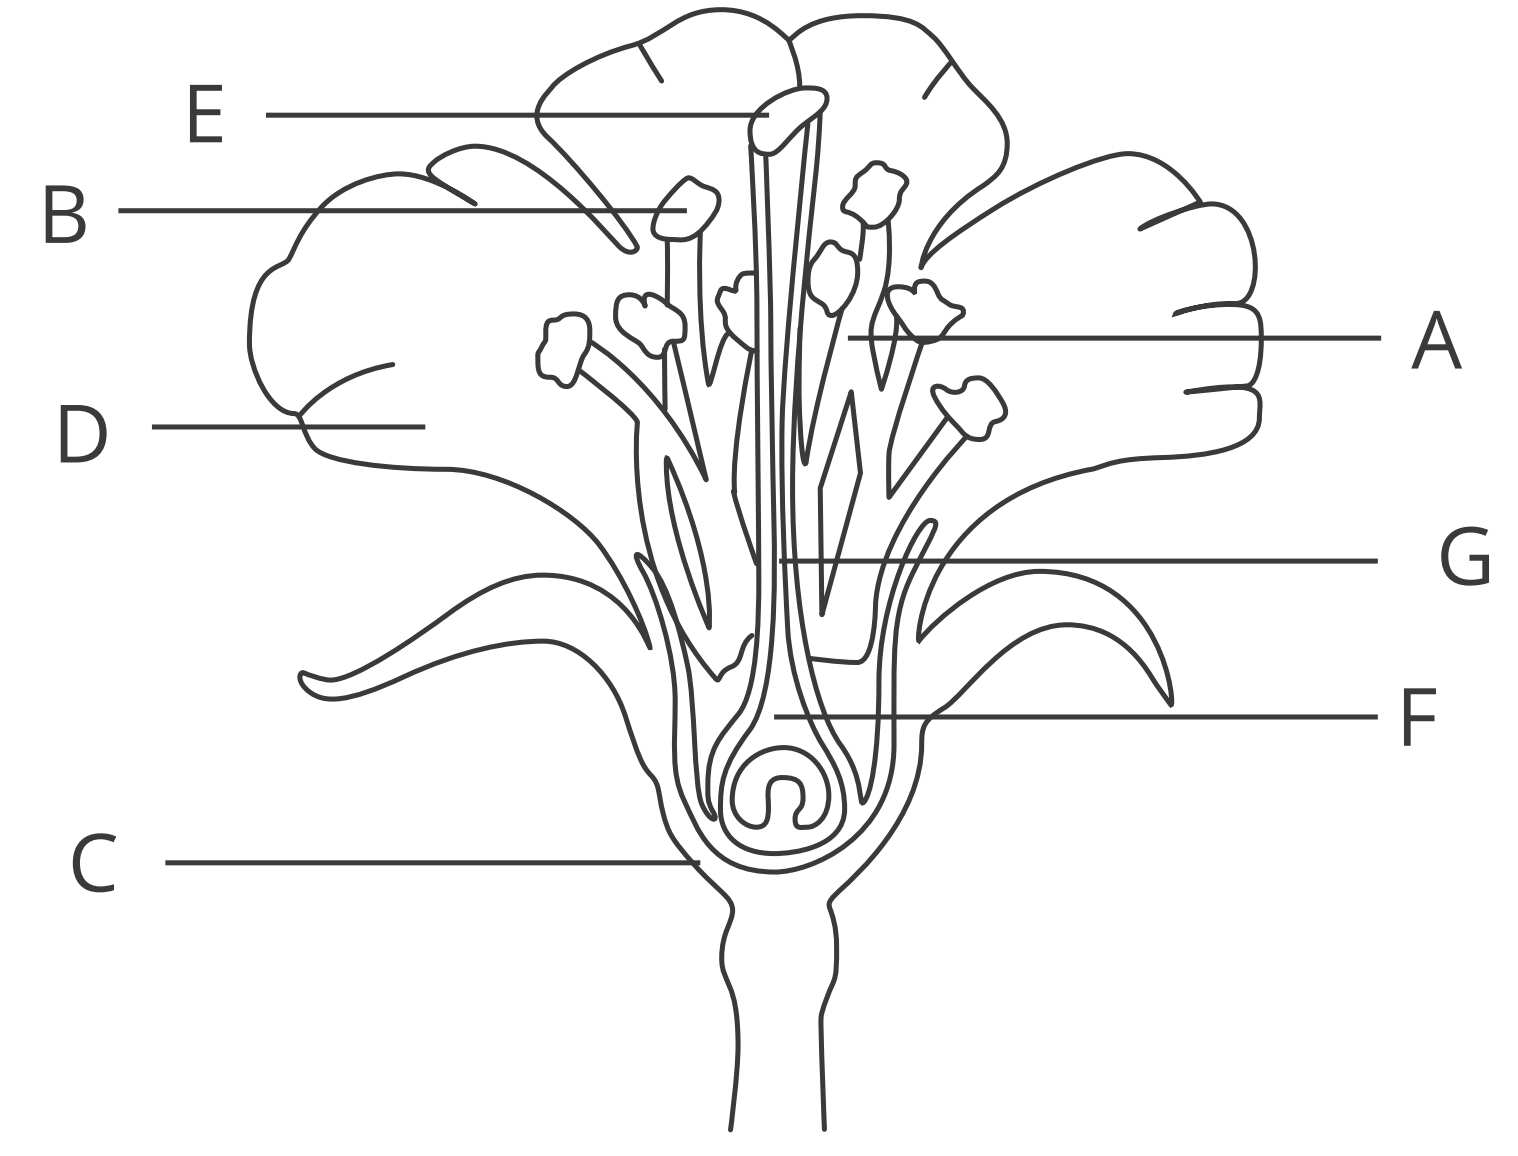 Identify reproductive parts of a flower